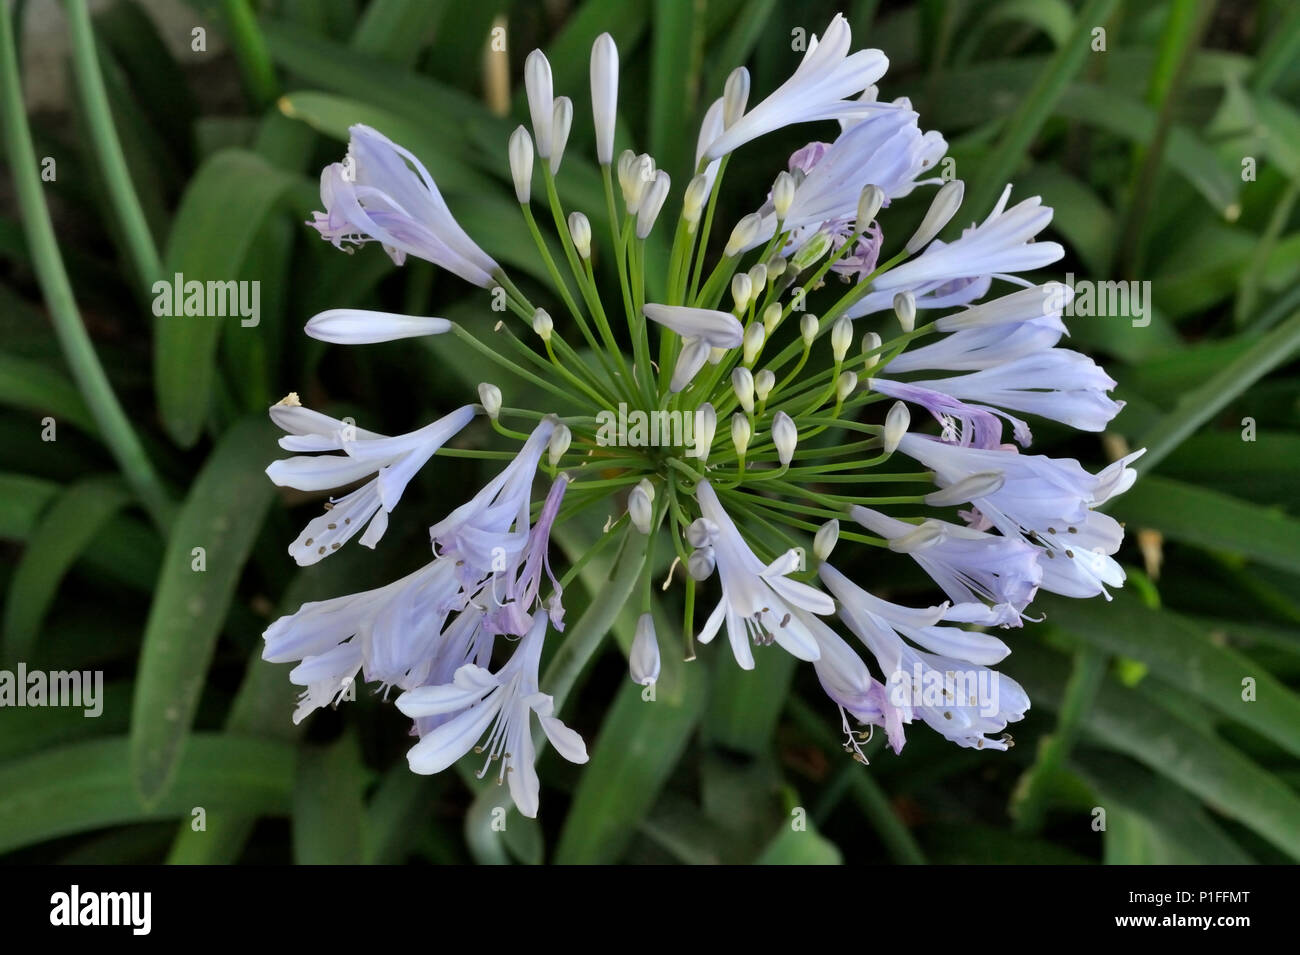 Agapanthus arficanus, African Lily, Lily of the Nile, Mission Viejo, CA 30299 080517 Banque D'Images